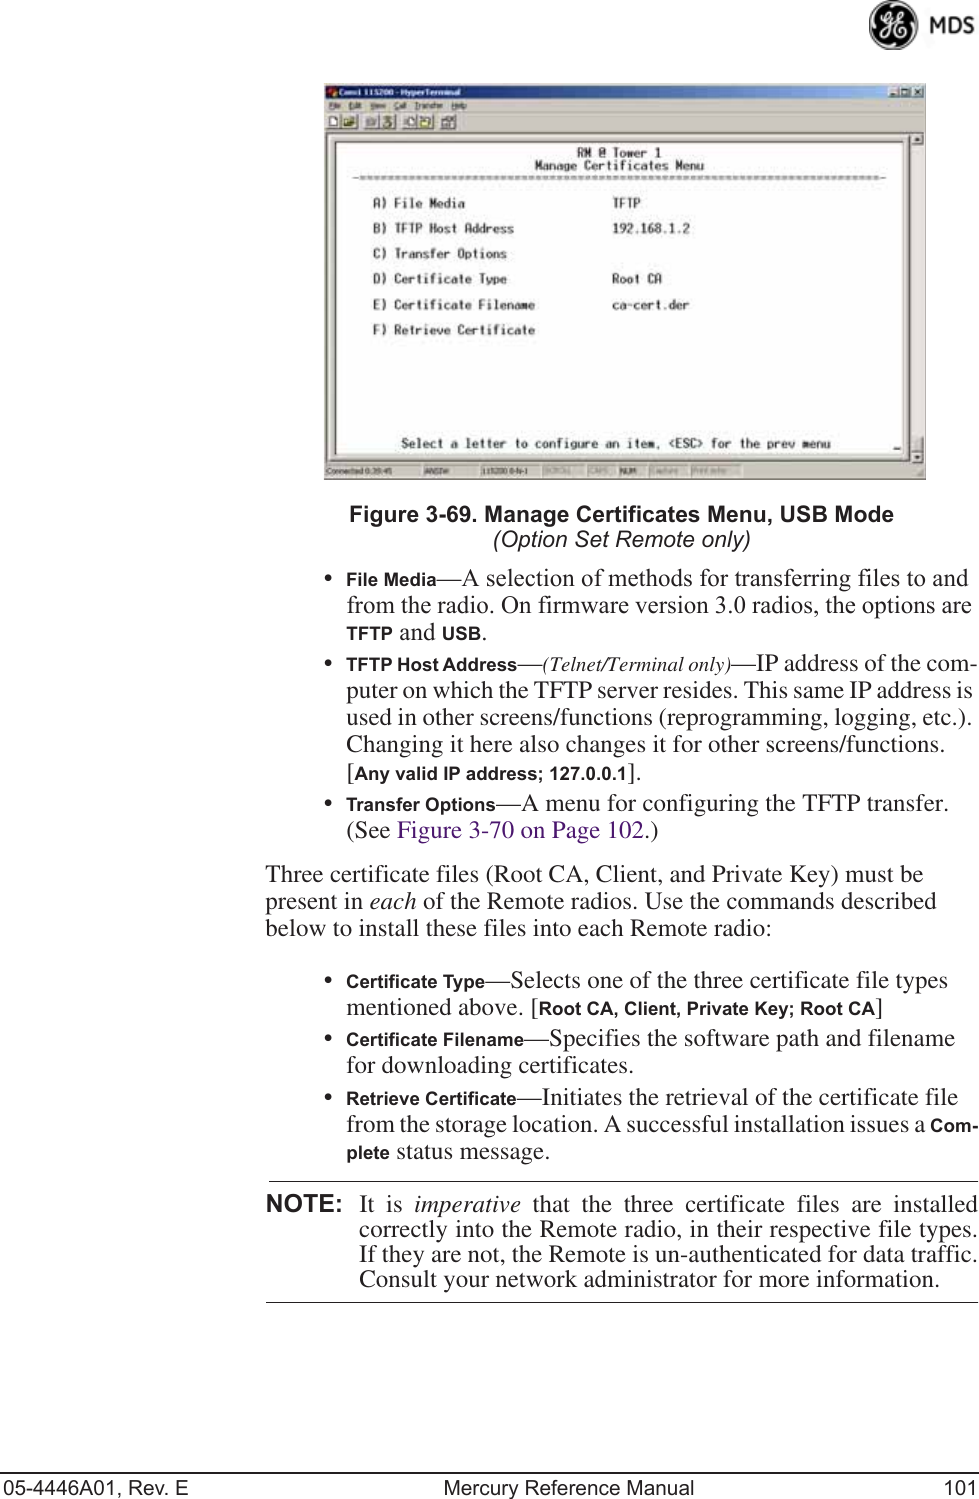 05-4446A01, Rev. E Mercury Reference Manual 101Invisible place holderFigure 3-69. Manage Certificates Menu, USB Mode(Option Set Remote only)•File Media—A selection of methods for transferring files to and from the radio. On firmware version 3.0 radios, the options are TFTP and USB.•TFTP Host Address—(Telnet/Terminal only)—IP address of the com-puter on which the TFTP server resides. This same IP address is used in other screens/functions (reprogramming, logging, etc.). Changing it here also changes it for other screens/functions.[Any valid IP address; 127.0.0.1].•Transfer Options—A menu for configuring the TFTP transfer. (See Figure 3-70 on Page 102.)Three certificate files (Root CA, Client, and Private Key) must be present in each of the Remote radios. Use the commands described below to install these files into each Remote radio:•Certificate Type—Selects one of the three certificate file types mentioned above. [Root CA, Client, Private Key; Root CA]•Certificate Filename—Specifies the software path and filename for downloading certificates.•Retrieve Certificate—Initiates the retrieval of the certificate file from the storage location. A successful installation issues a Com-plete status message.NOTE: It is imperative that the three certificate files are installedcorrectly into the Remote radio, in their respective file types.If they are not, the Remote is un-authenticated for data traffic.Consult your network administrator for more information.